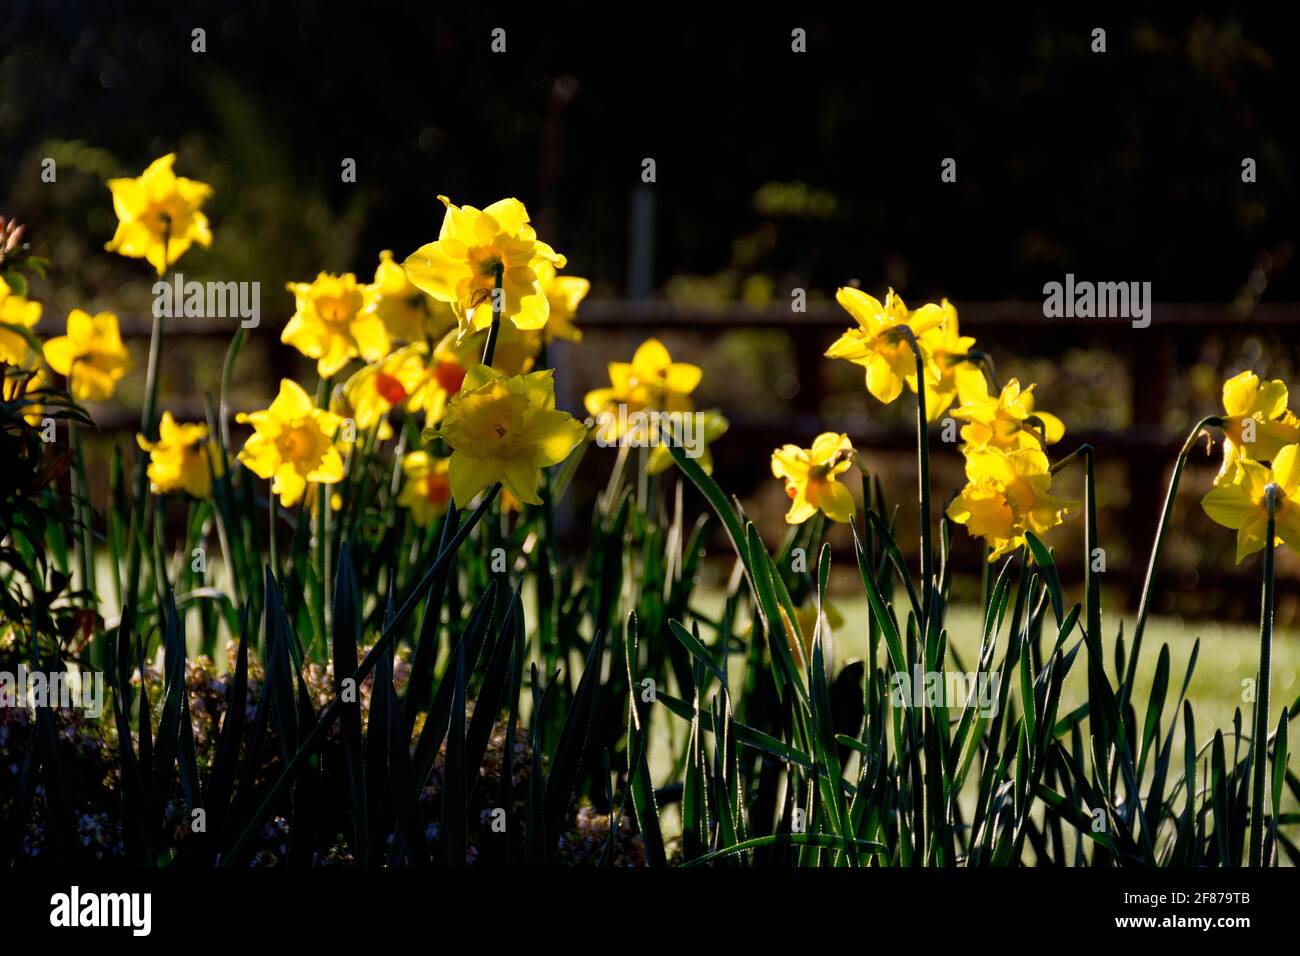 Daffodils flowering. Narcissus is a genus of predominantly spring flowering perennial plants of the amaryllis family, Amaryllidaceae. Stock Photo